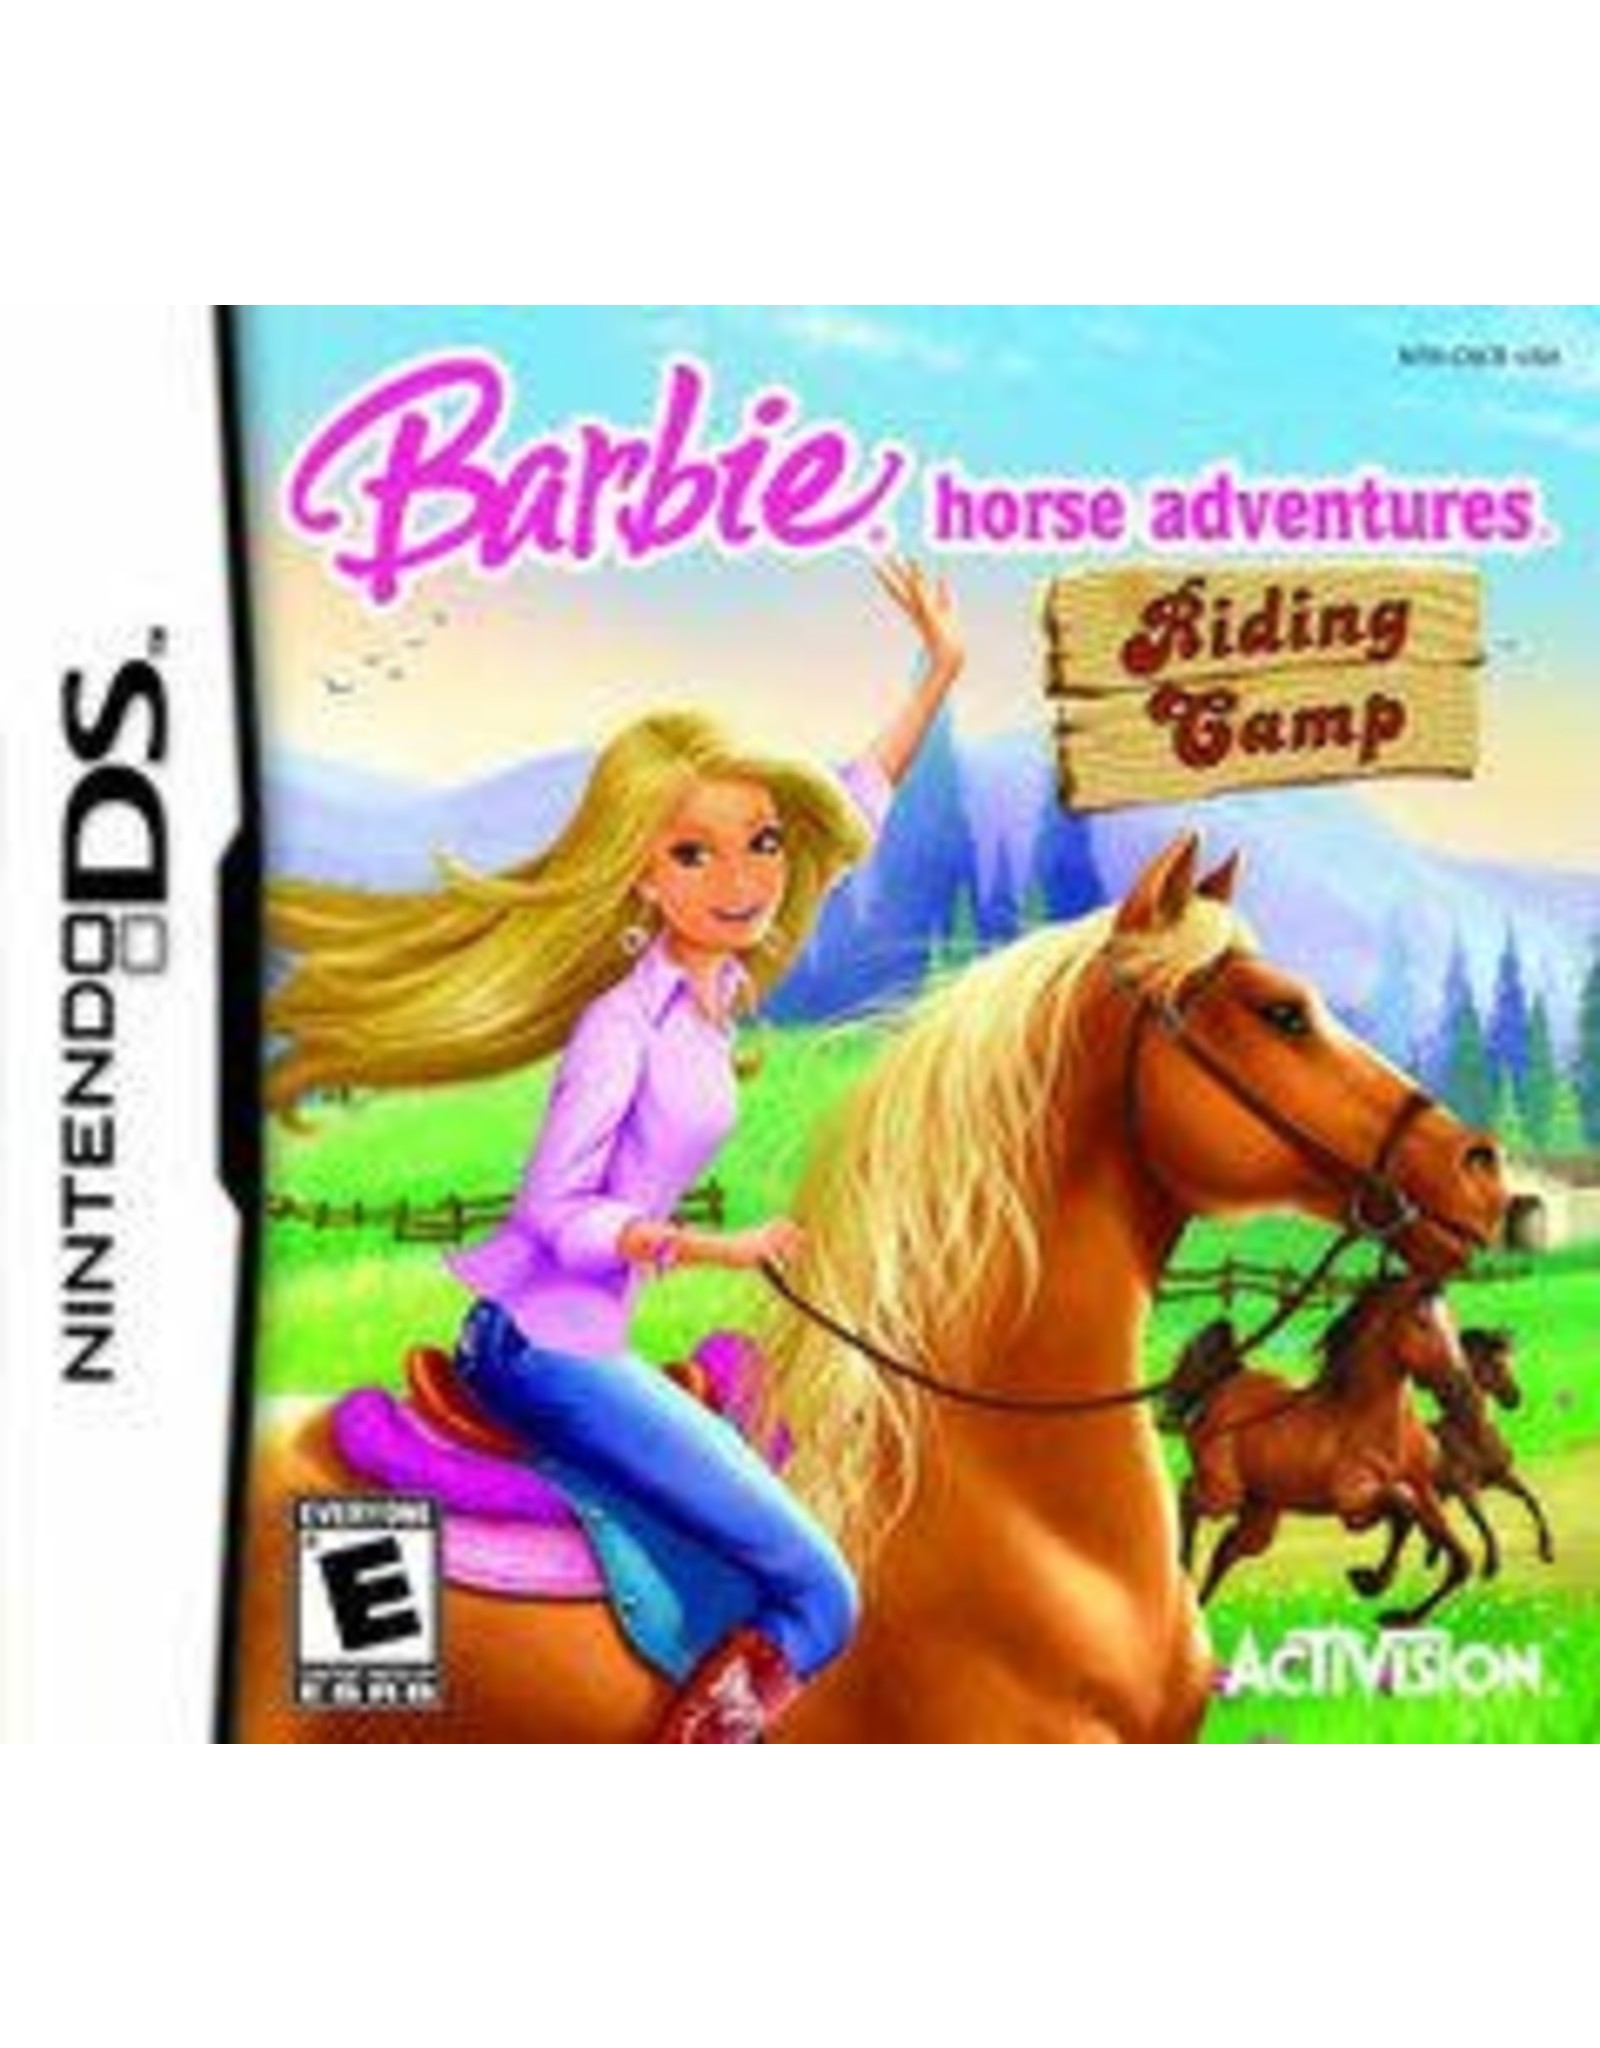 Nintendo DS Barbie Horse Adventures: Riding Camp (Cart Only)